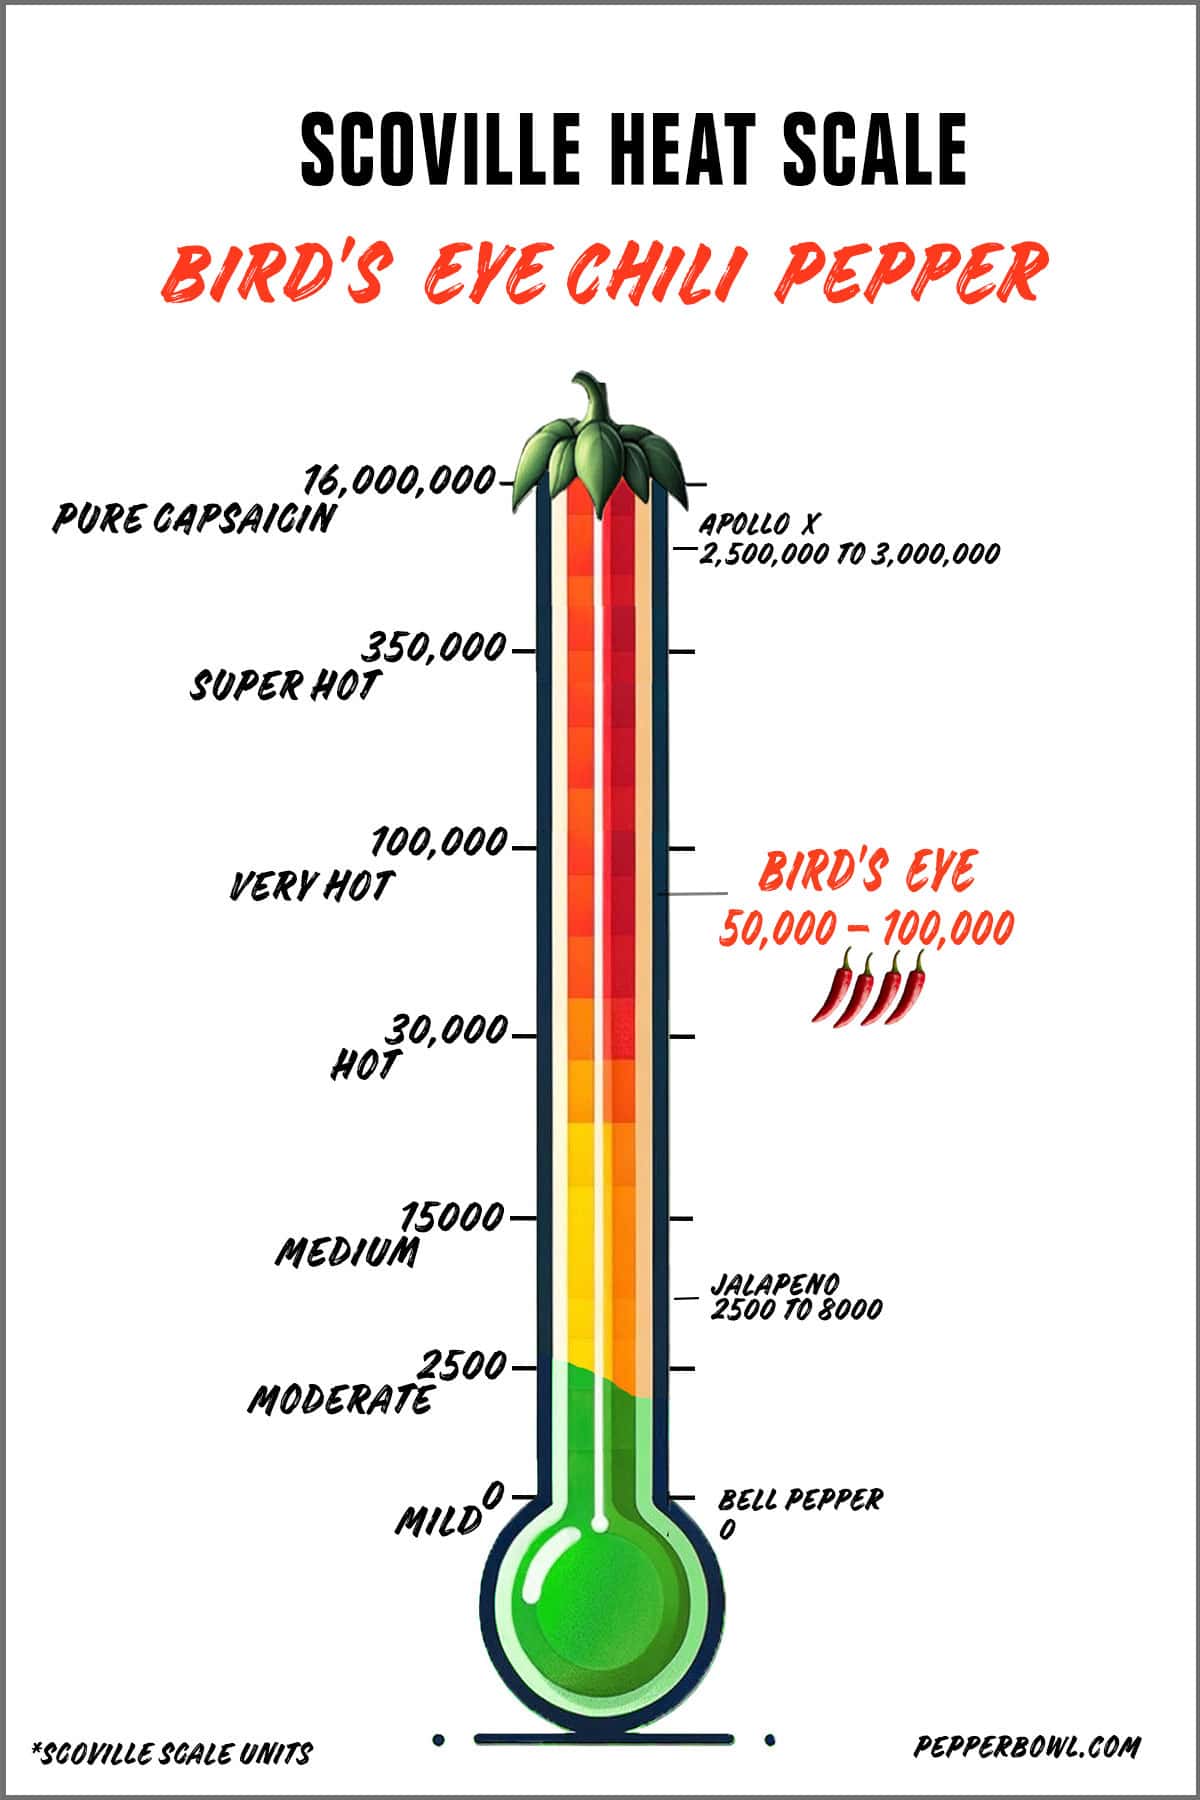 Illustration of the birds eye chili pepper in the Scoville scale, representing its  hot heat intensity.